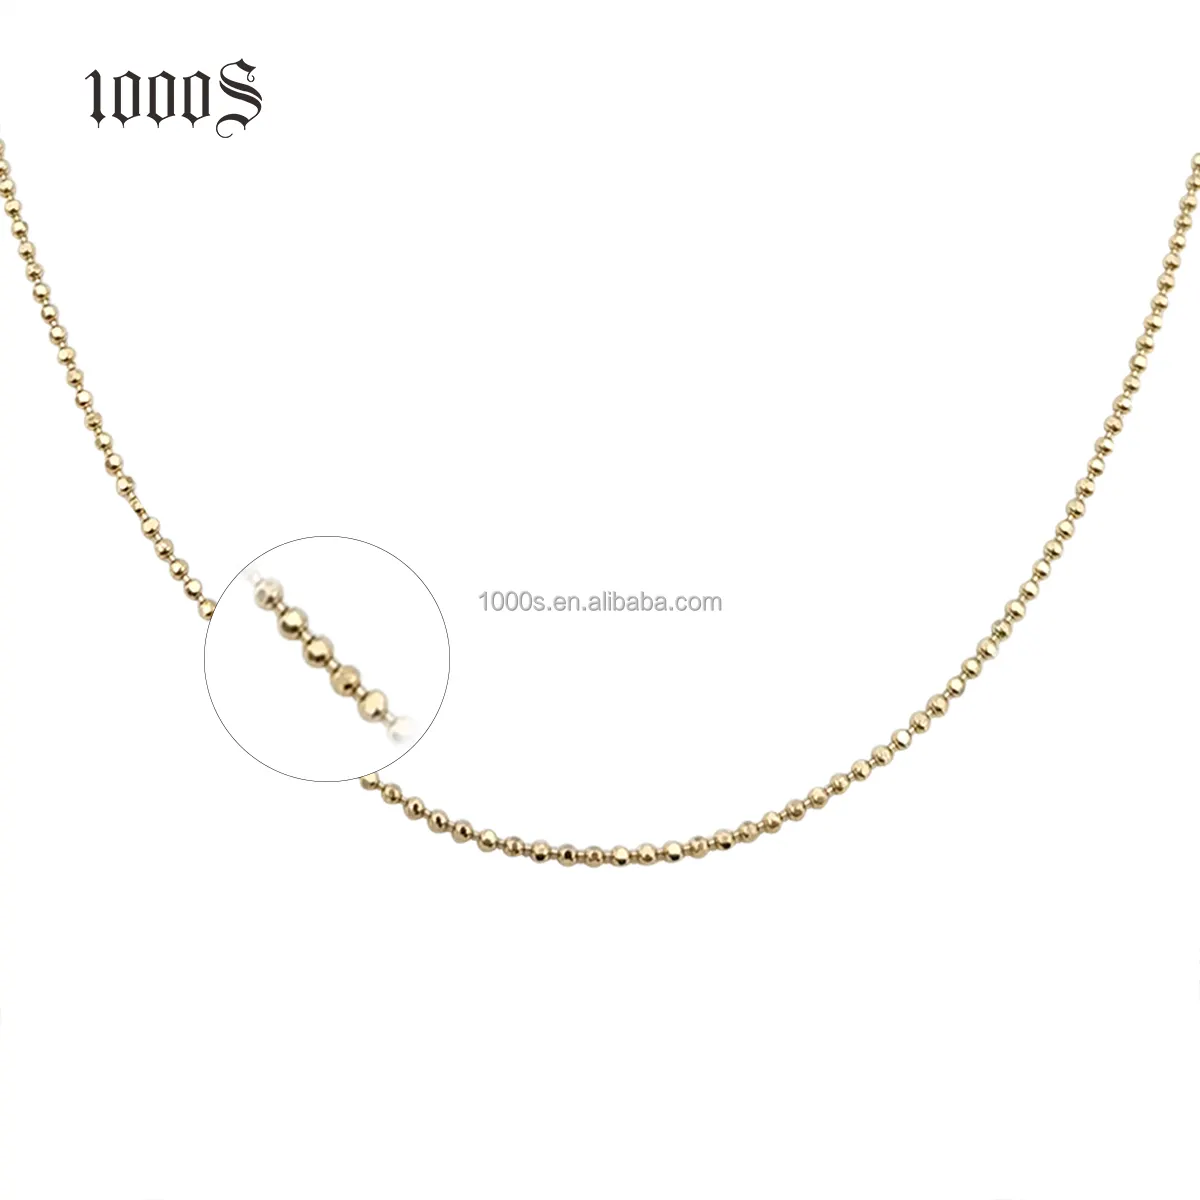 Wholesale Hot Selling 14K Yellow Gold Sparkling Bead Ball Chain Necklace Gold Jewelry for Women Men Gift Customized 9k 18k gold